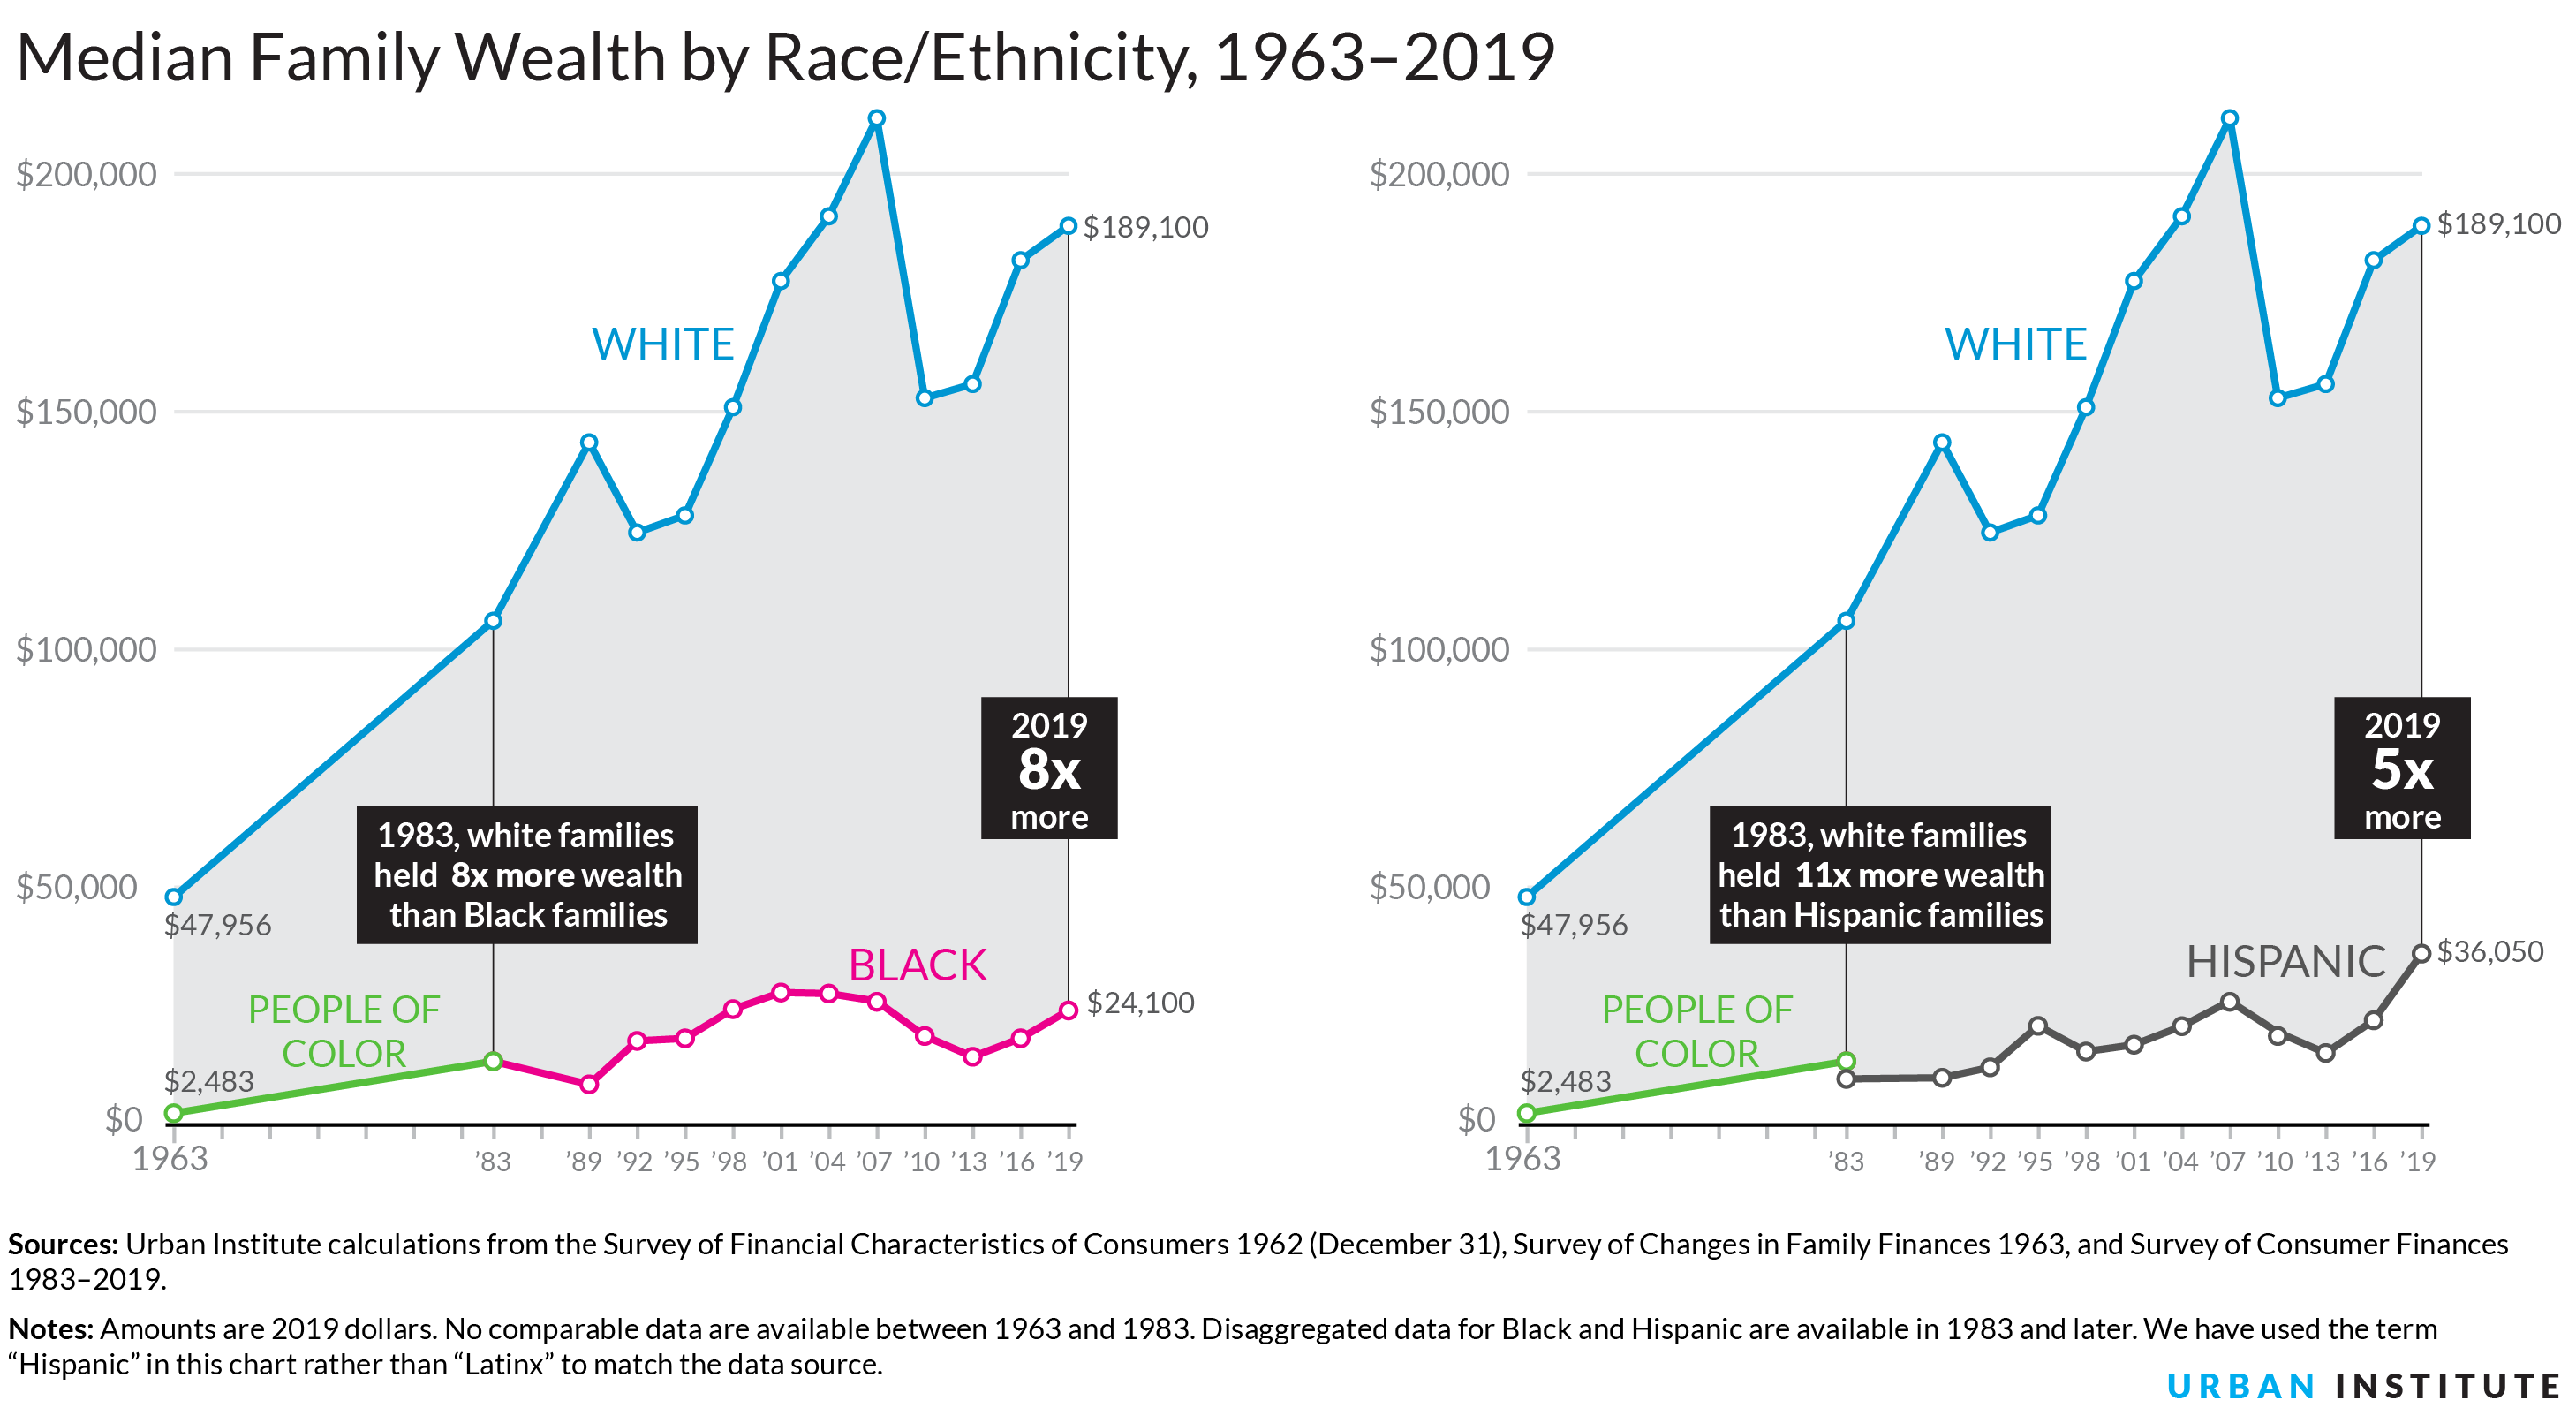 Median family wealth by race and ethnicity, from 1963-2019